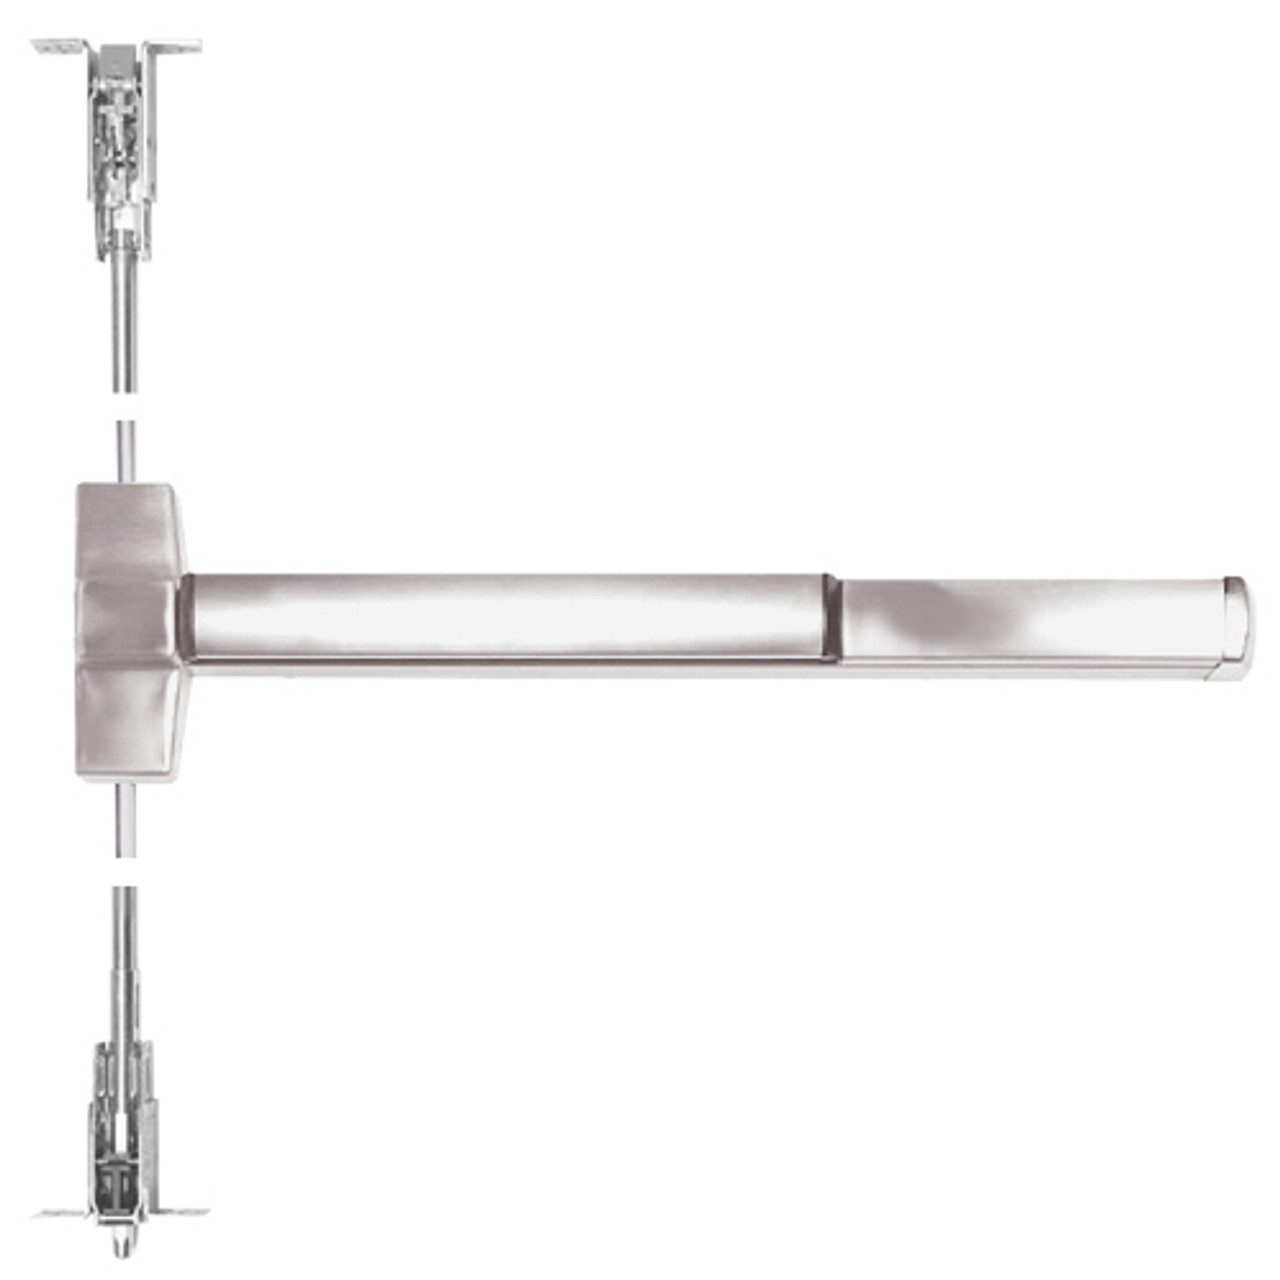 ED5800A-630 Corbin ED5800 Series Fire Rated Concealed Vertical Rod Device in Satin Stainless Steel Finish